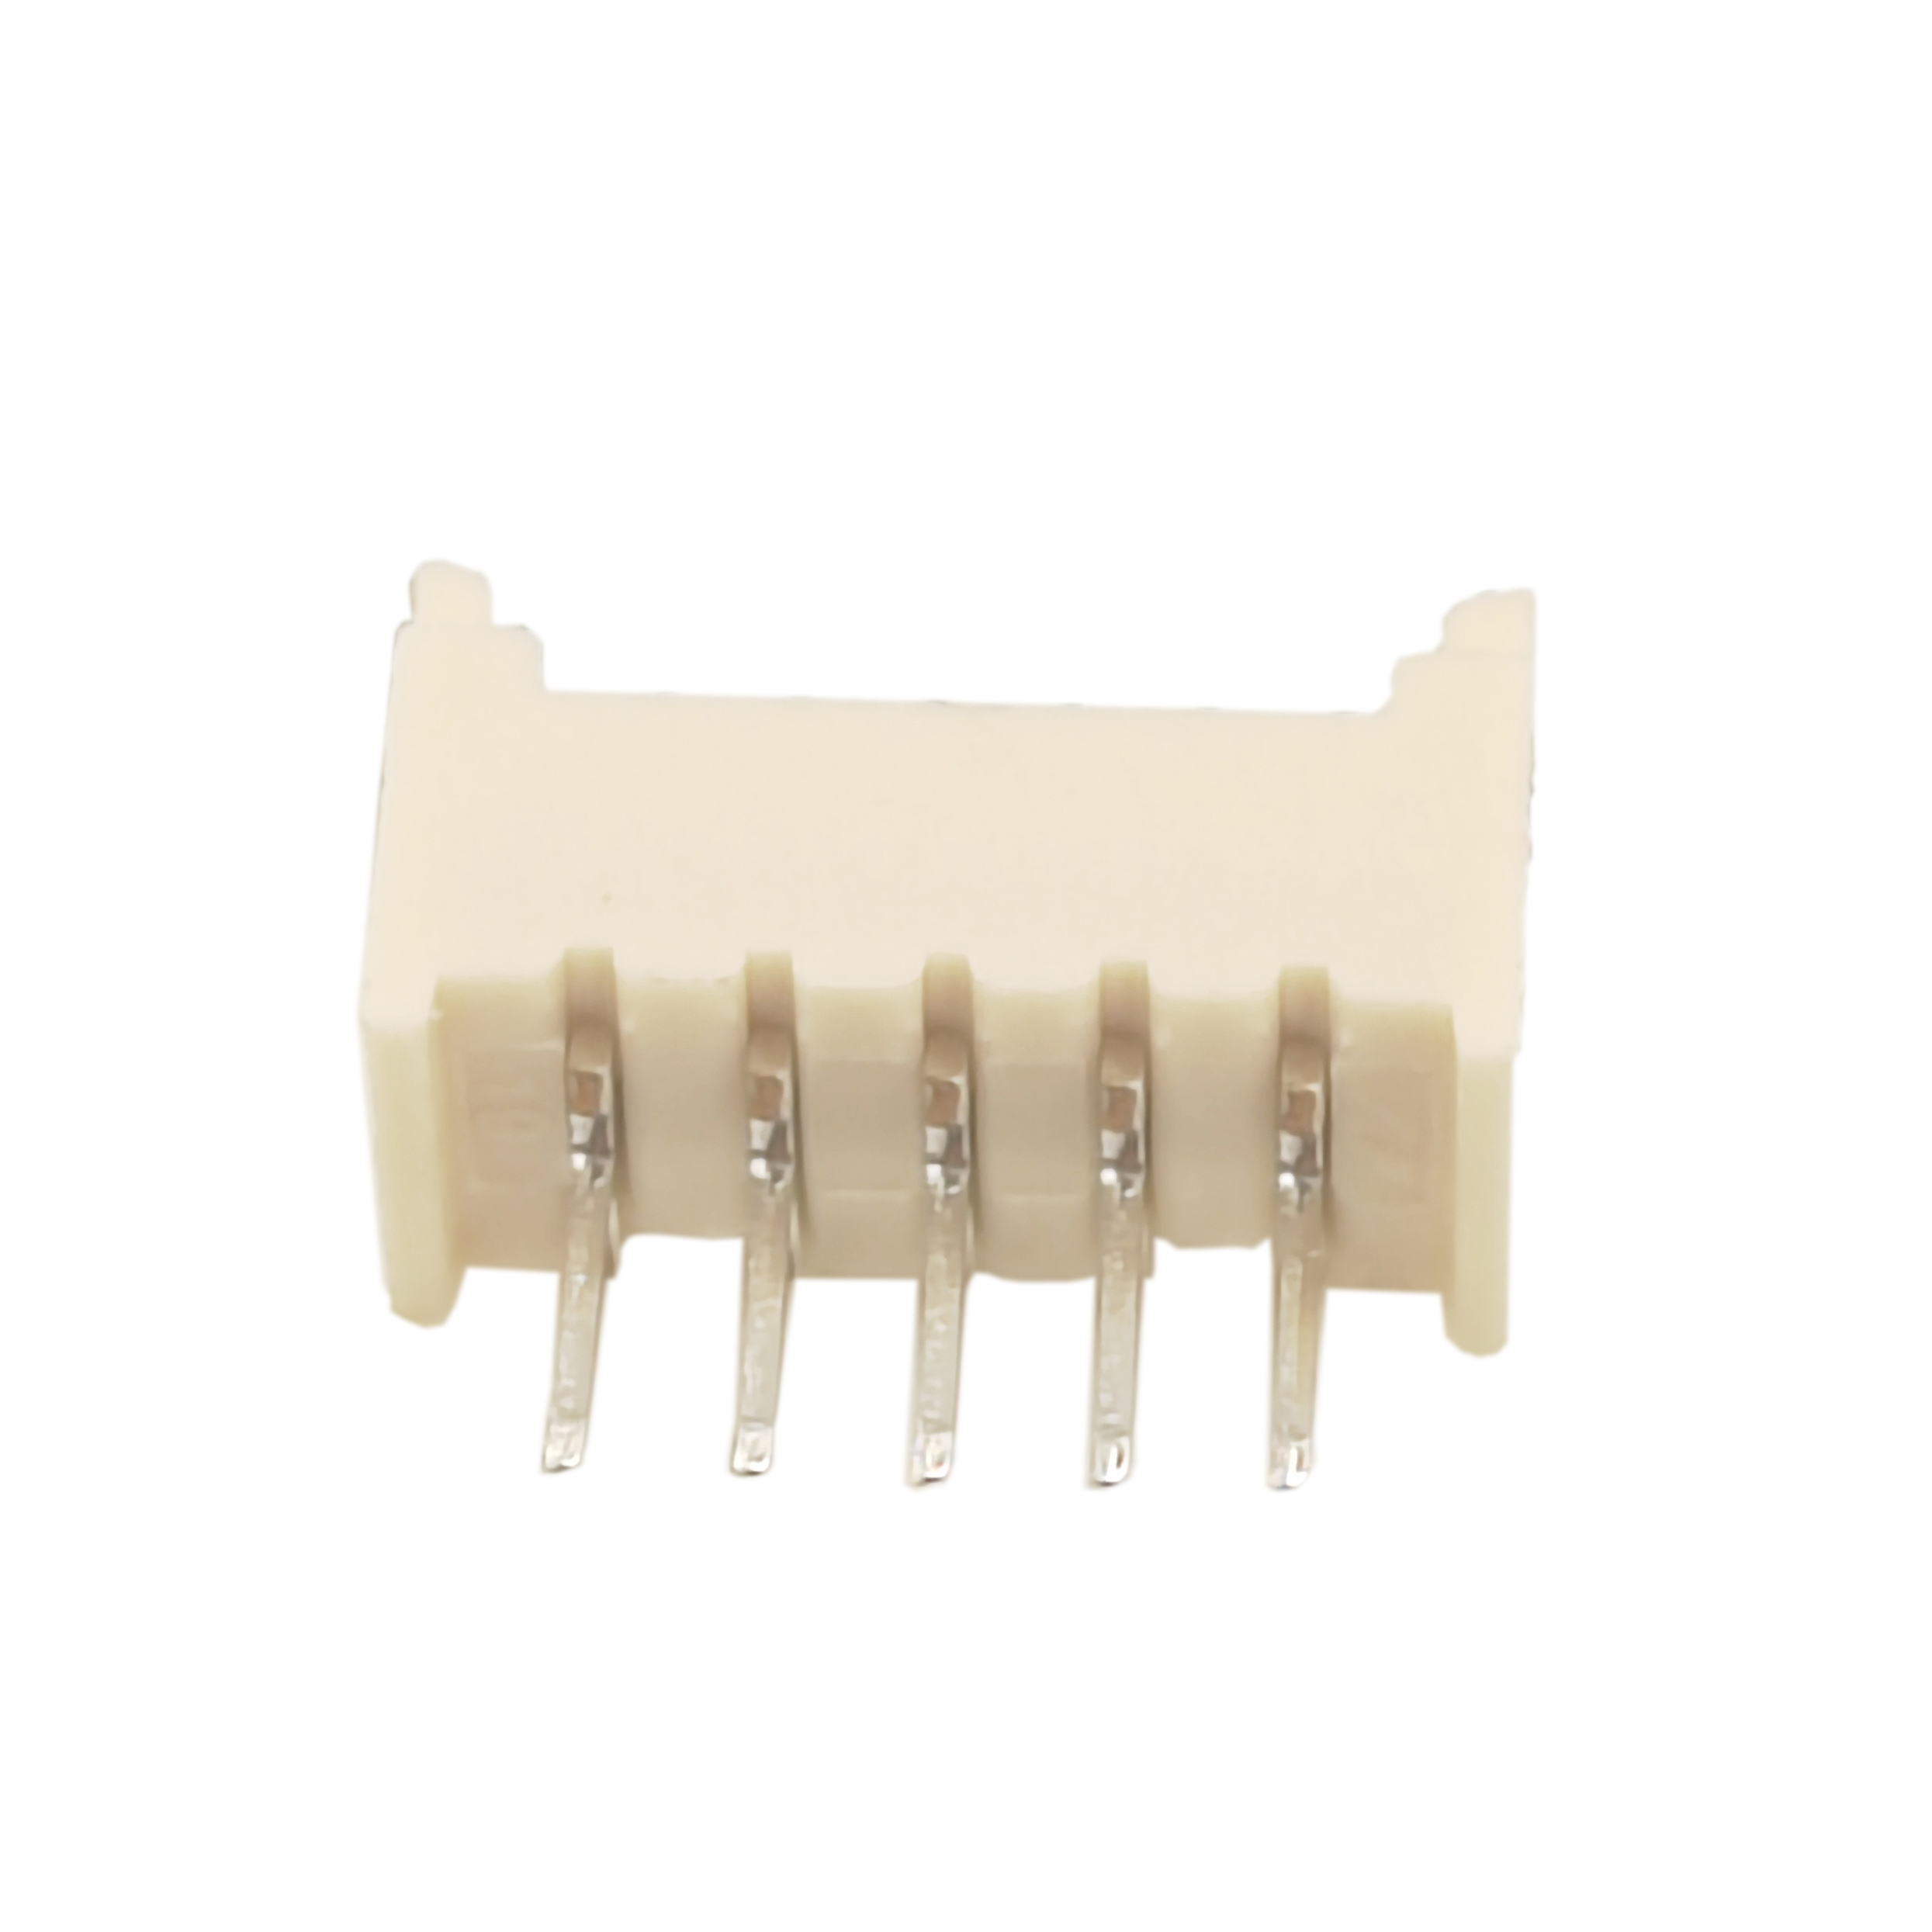 53047 0510: A trusted connector solution, known for its precision and durability, delivering superior performance across diverse applications. 